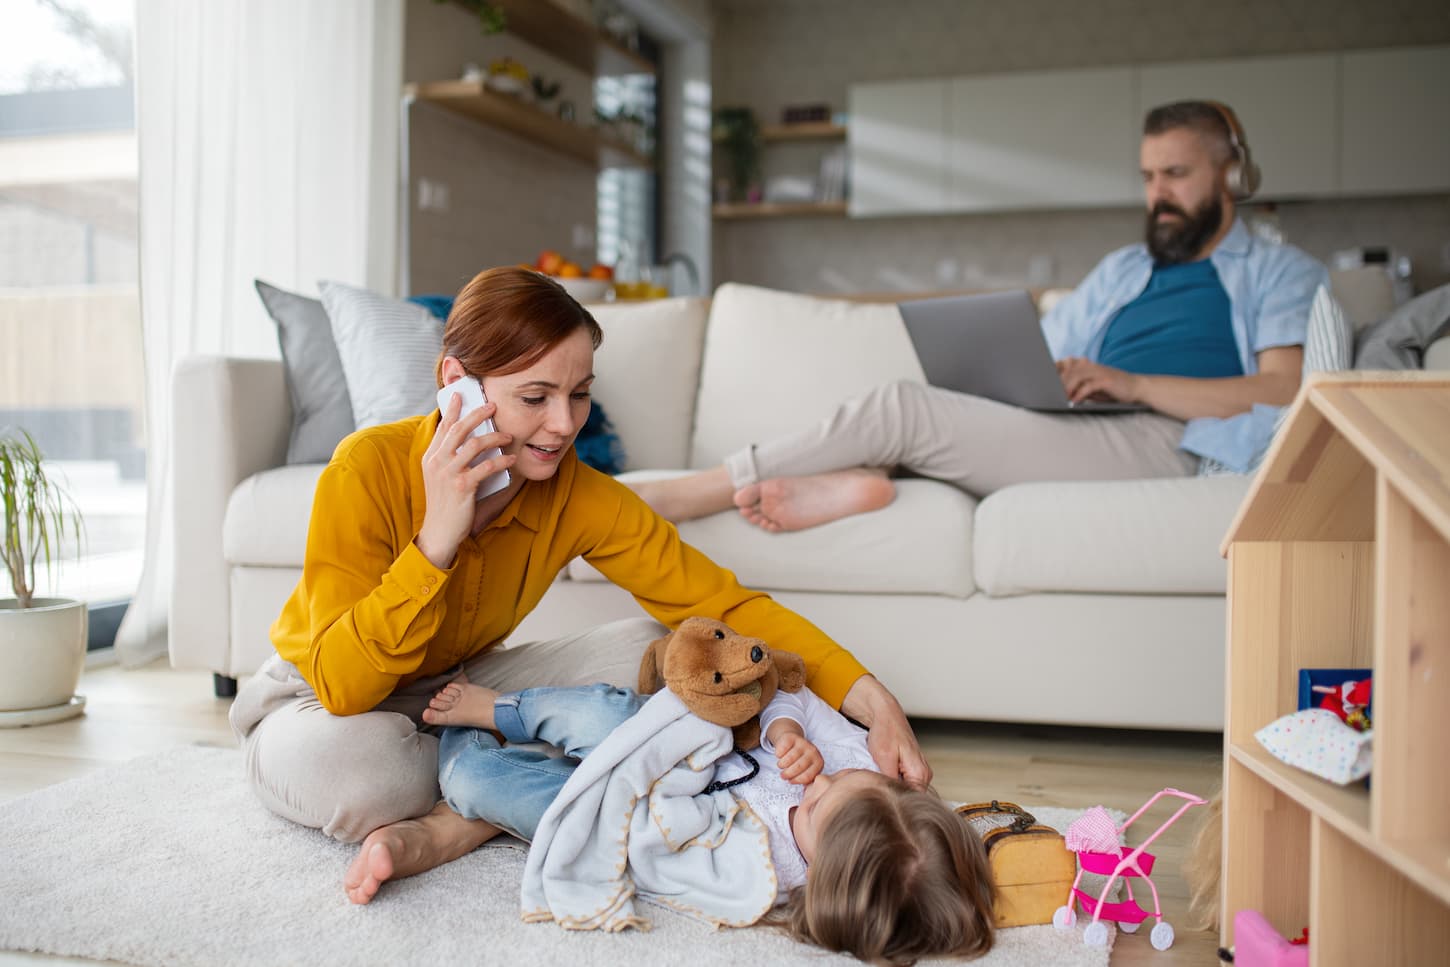 An image of a child laying on the floor while her mother is on the phone and her father in front of a laptop working at home.